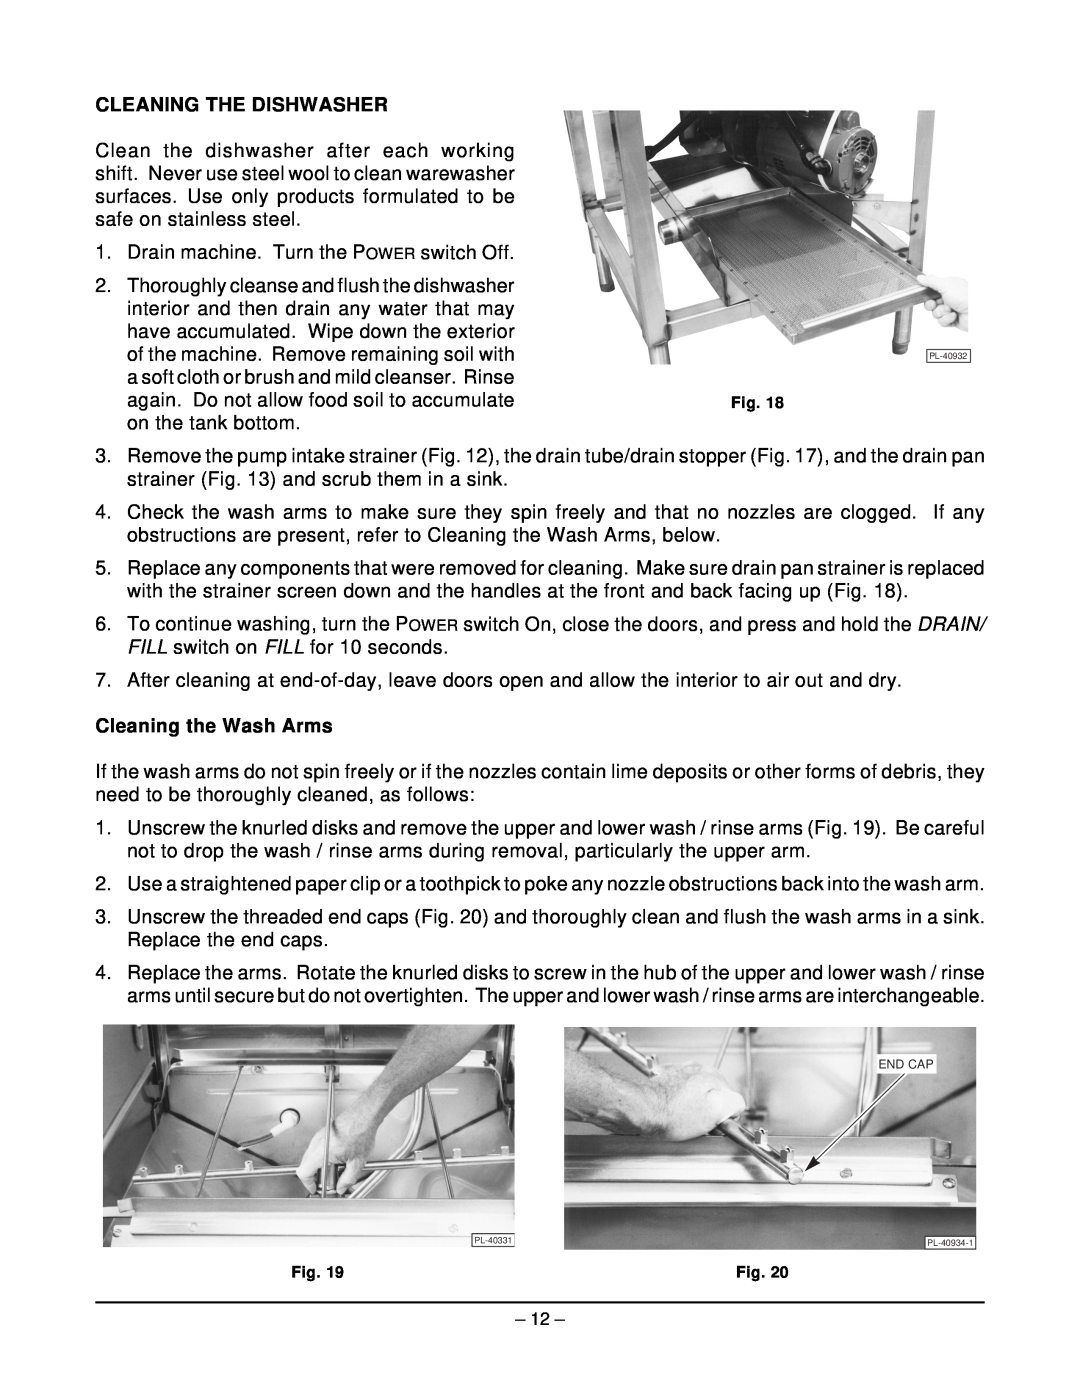 Hobart LT1 ML-104239 manual Cleaning The Dishwasher, Cleaning the Wash Arms 